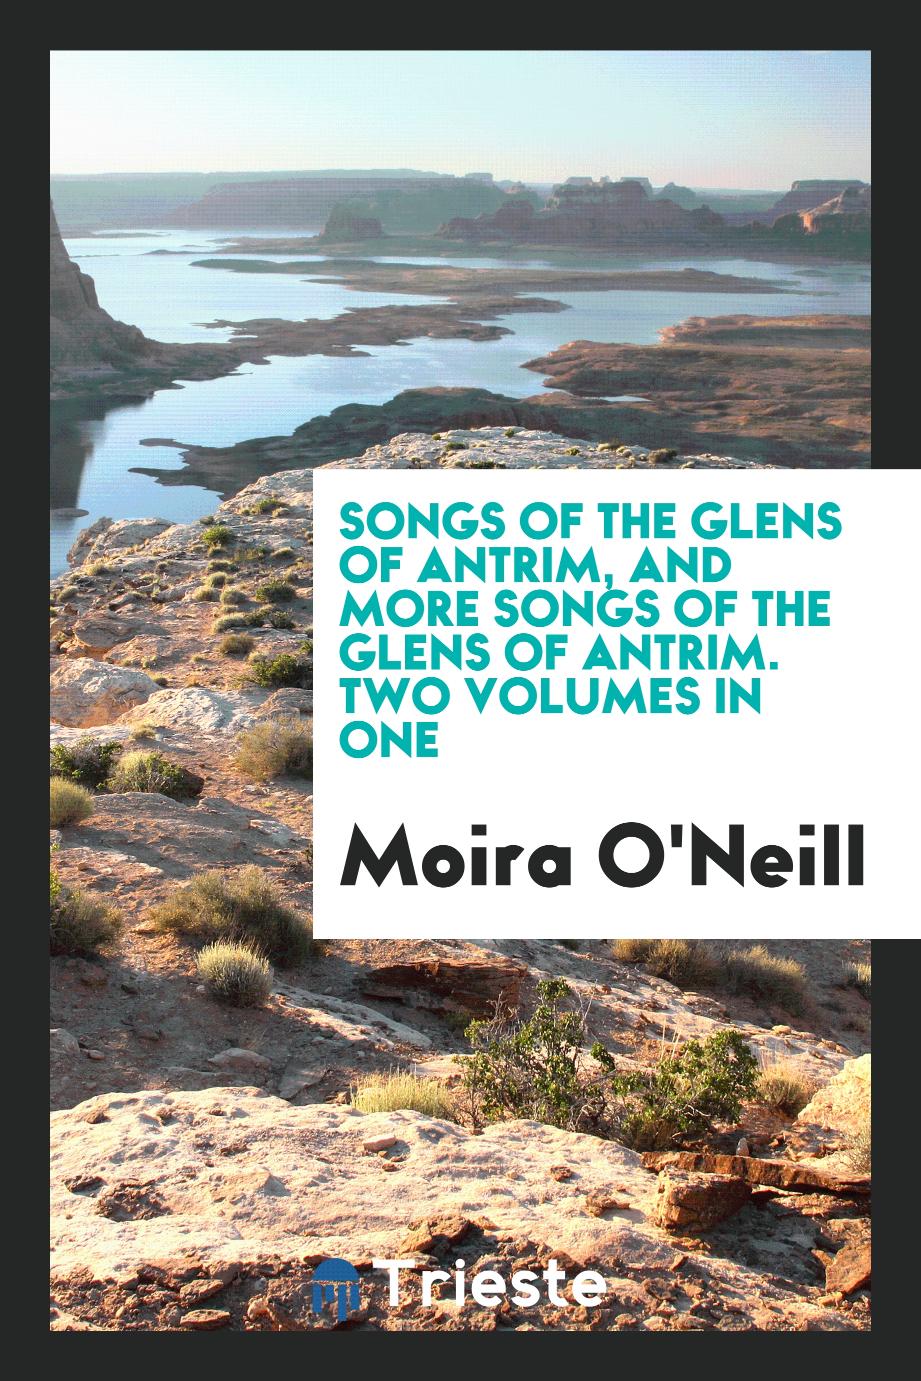 Songs of the Glens of Antrim, and More Songs of the Glens of Antrim. Two Volumes in One